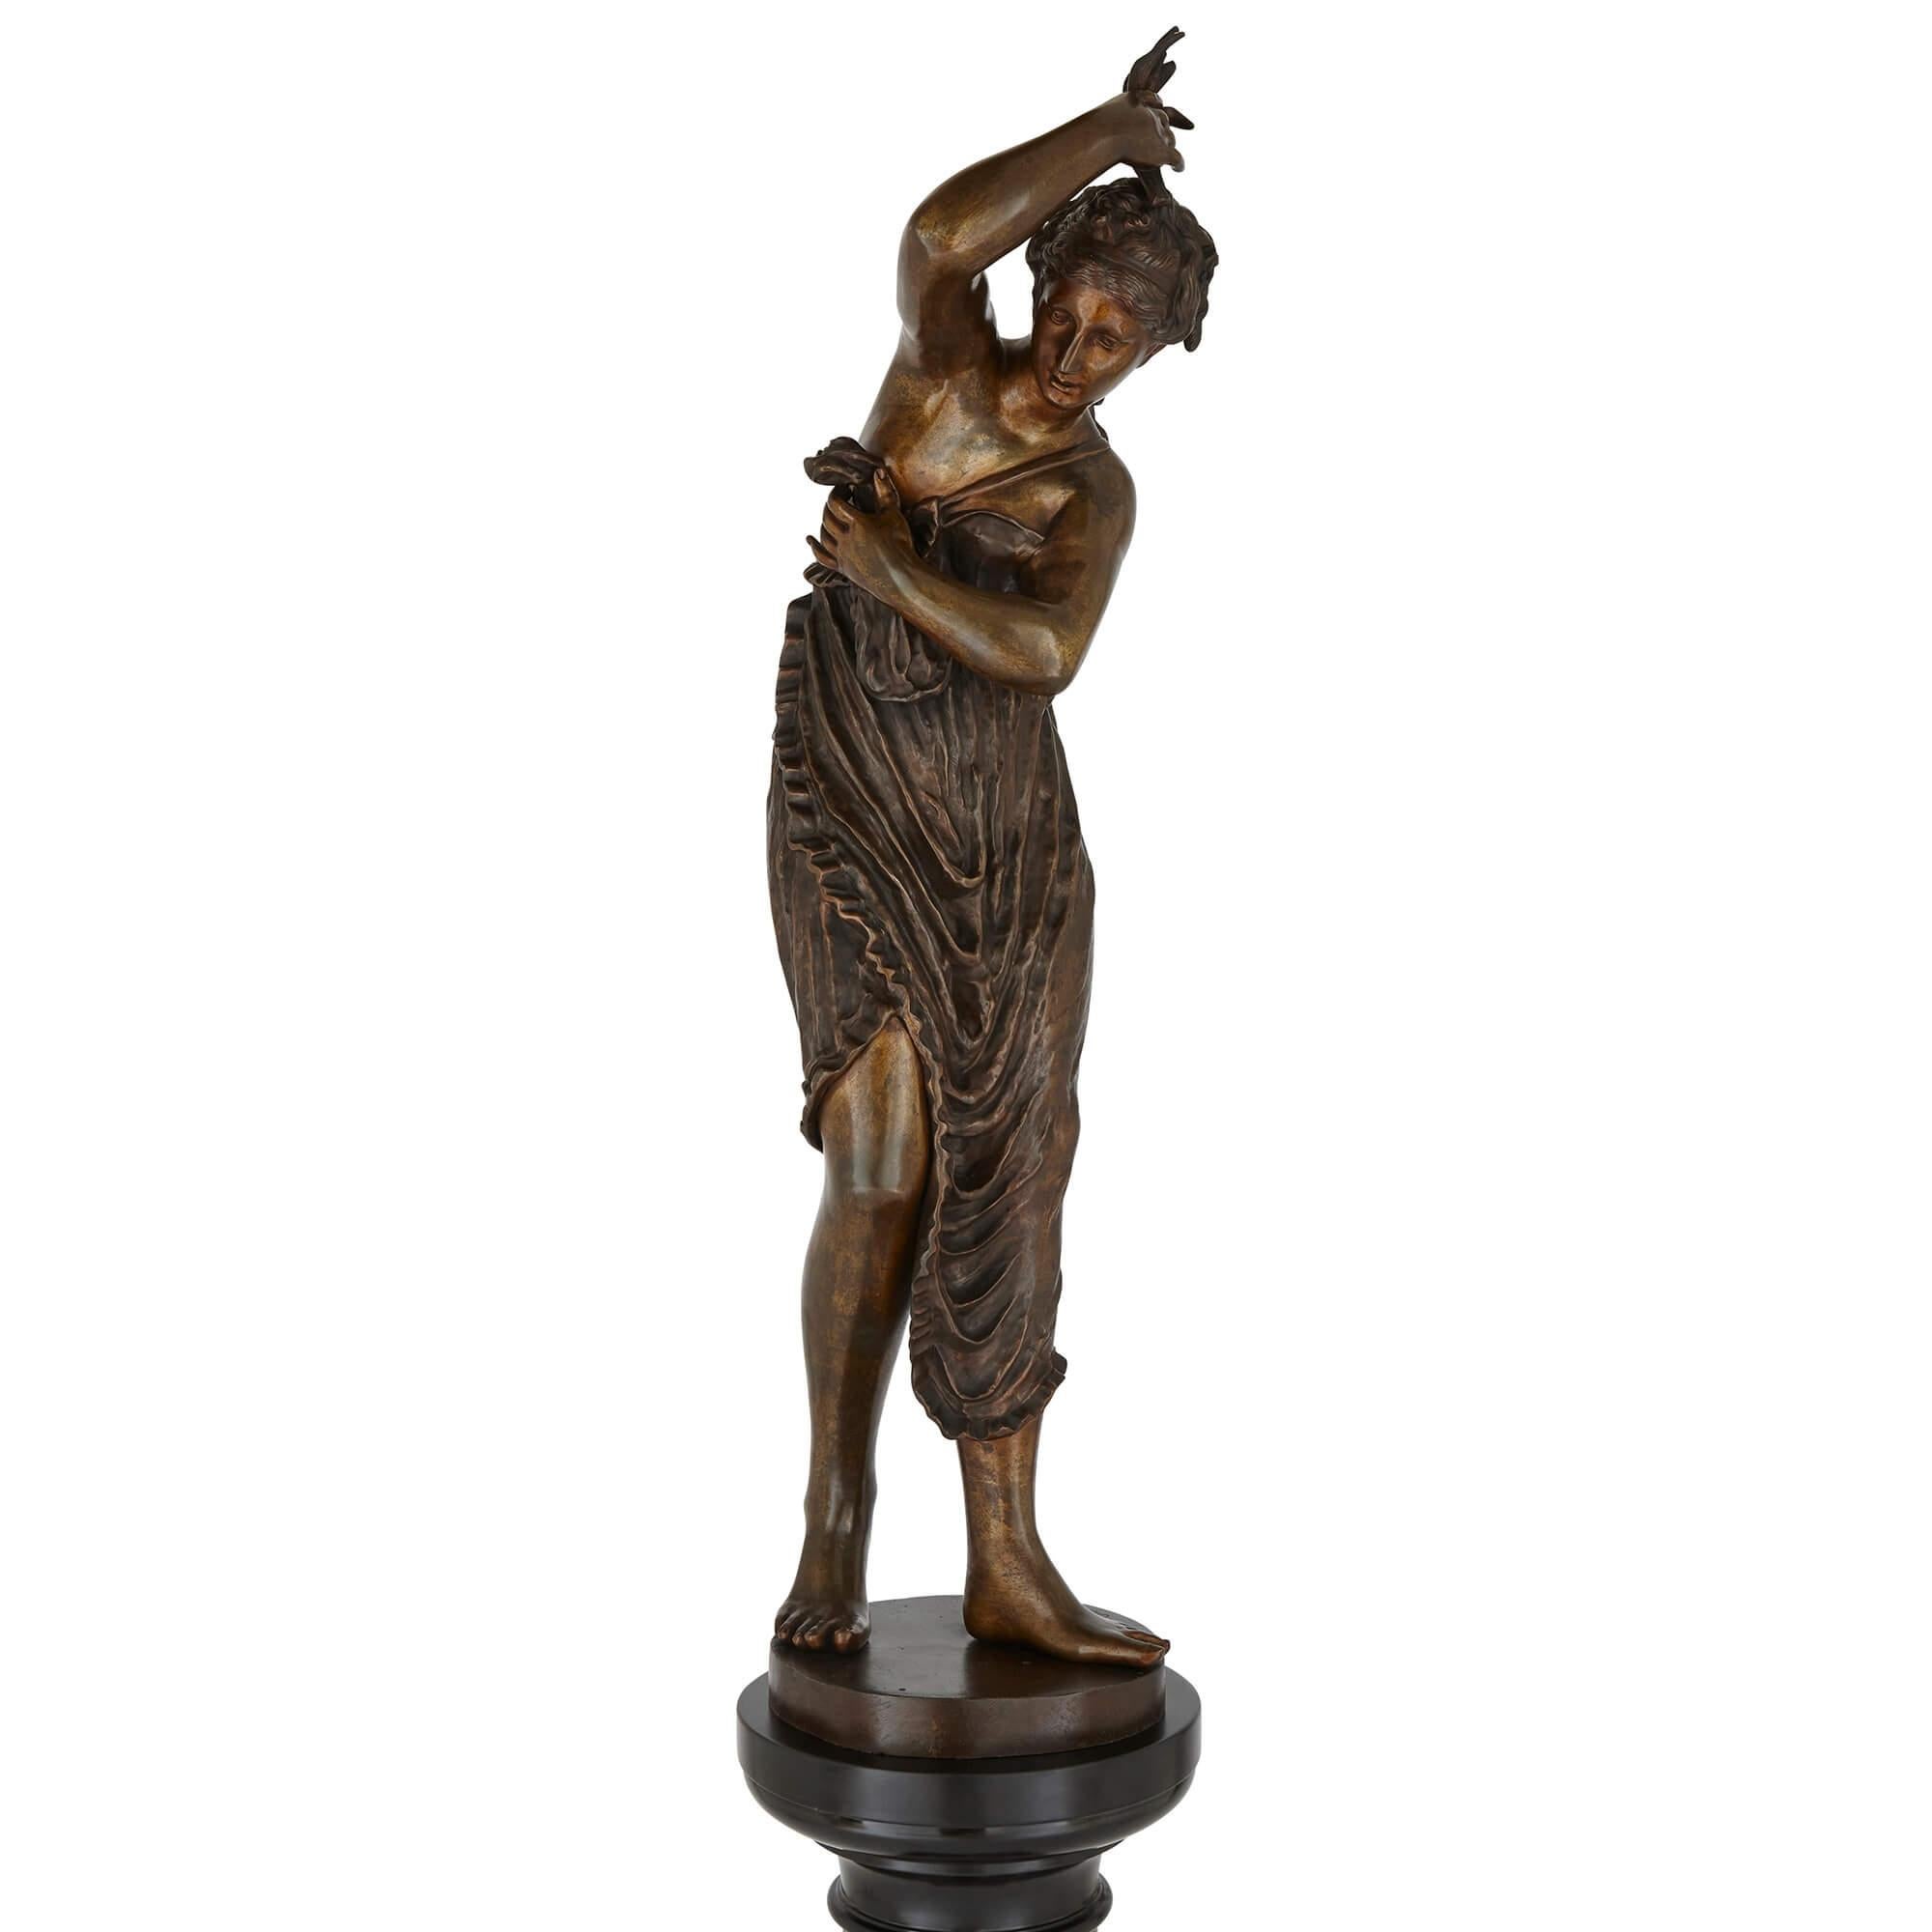 This intriguing statue depicts the water nymph Ondine, an enduring and popular figure in a multitude of European mythological traditions. Originally conceived as group of water deities in the writings of Paracelsus in the German Renaissance,